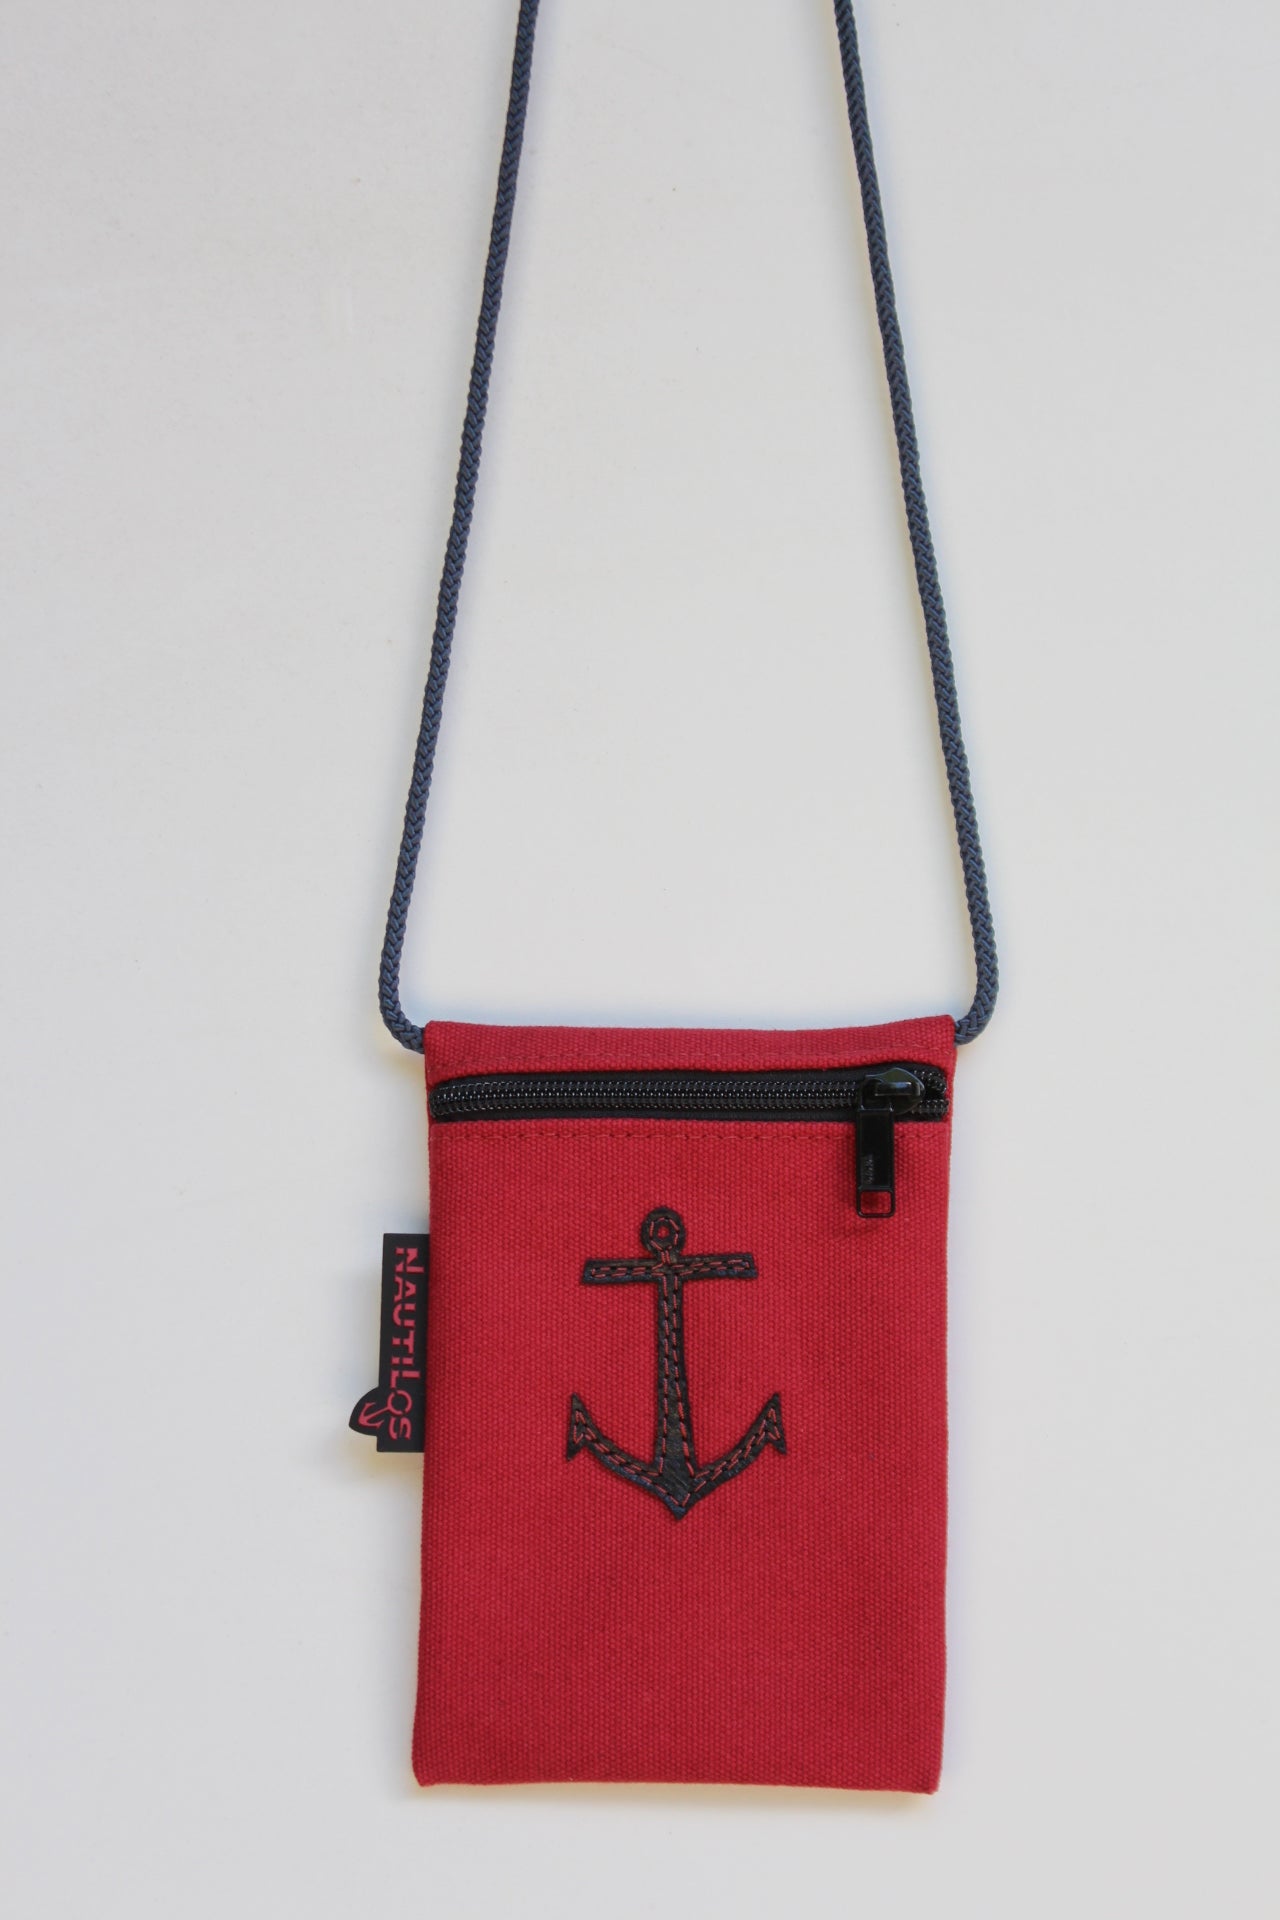 Red anchor